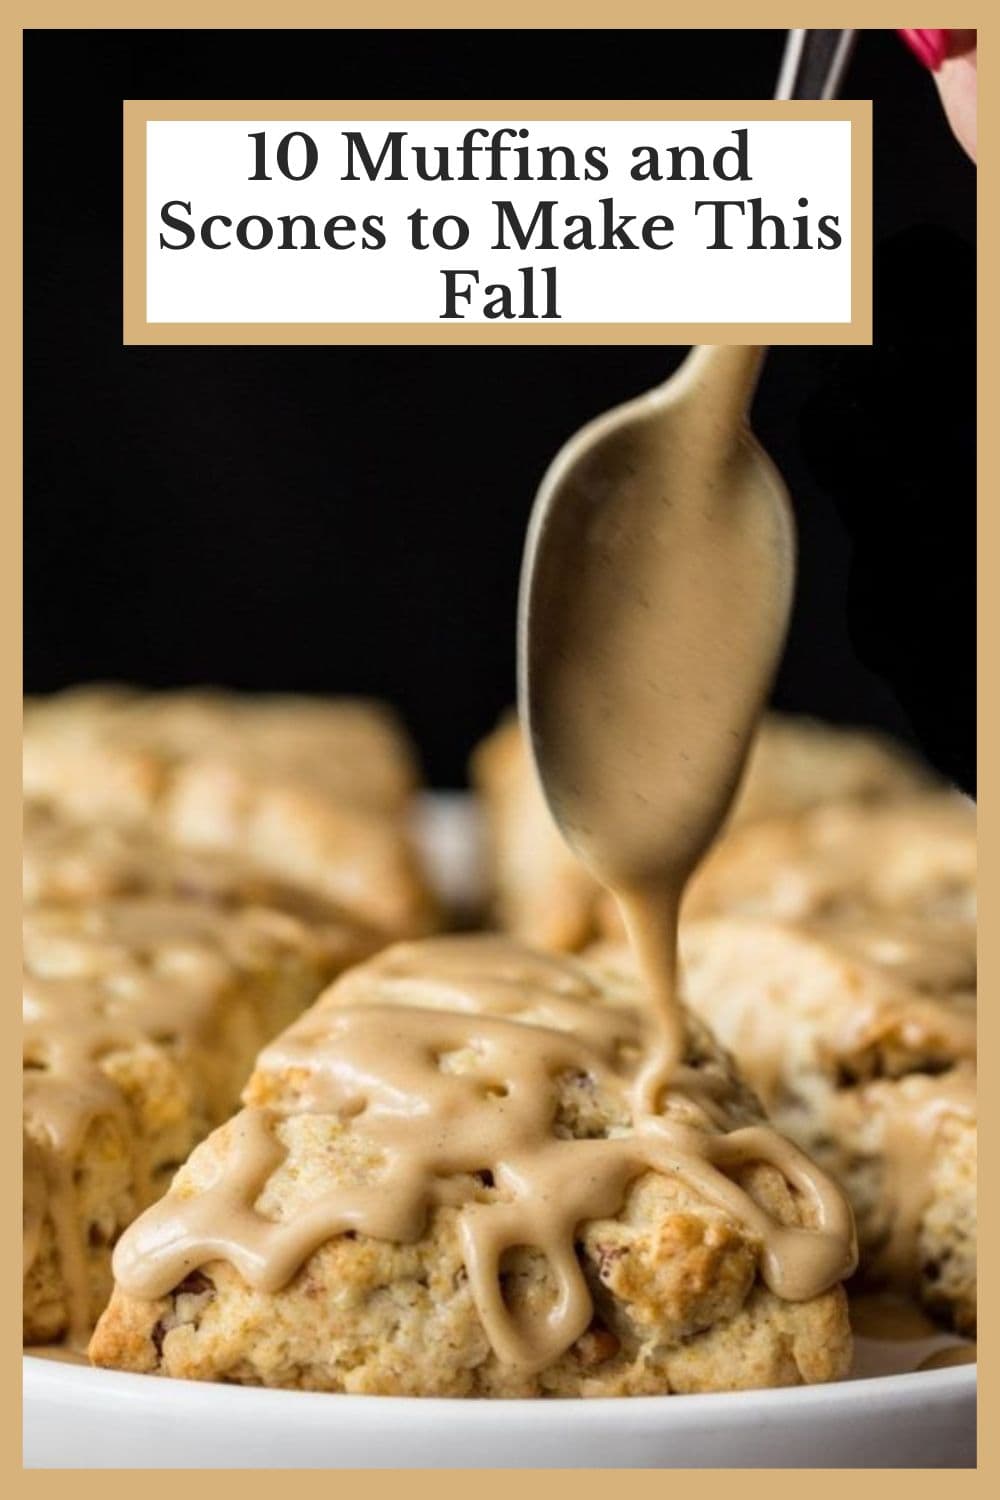 Jump into the Flavors of Fall! 11 Seasonal Muffin and Scone Recipes